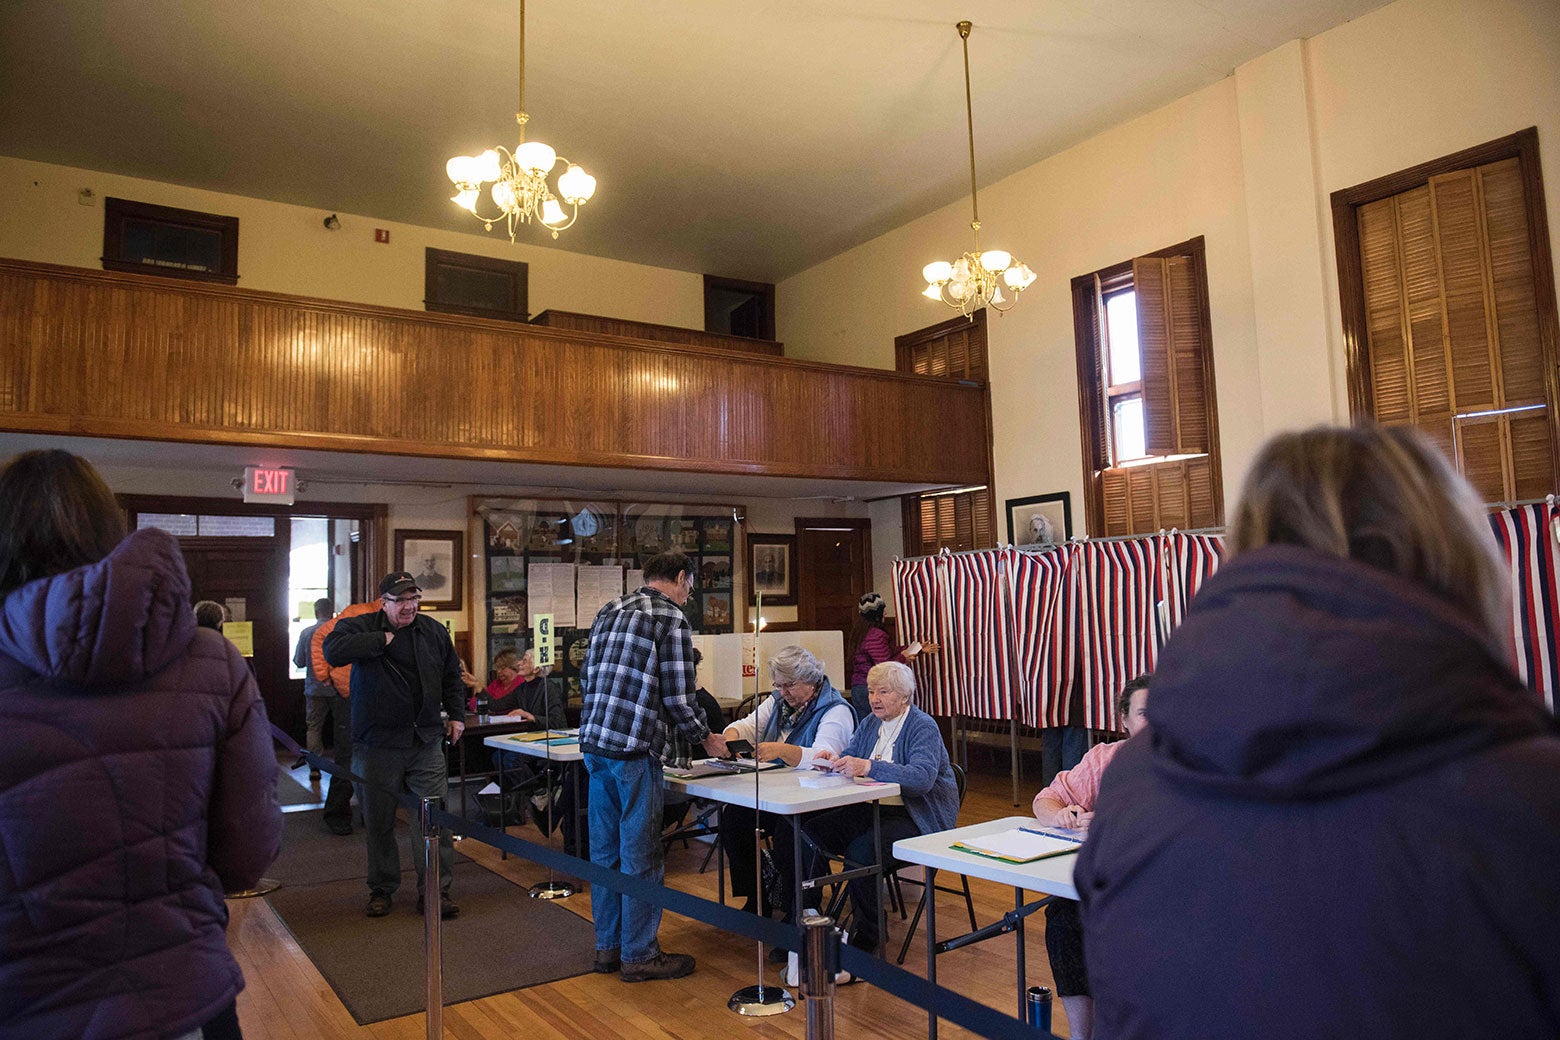 Voters cast their ballots in the U.S. presidential election at the Sutton Town Hall on Nov. 8, 2016, in Sutton, New Hampshire.